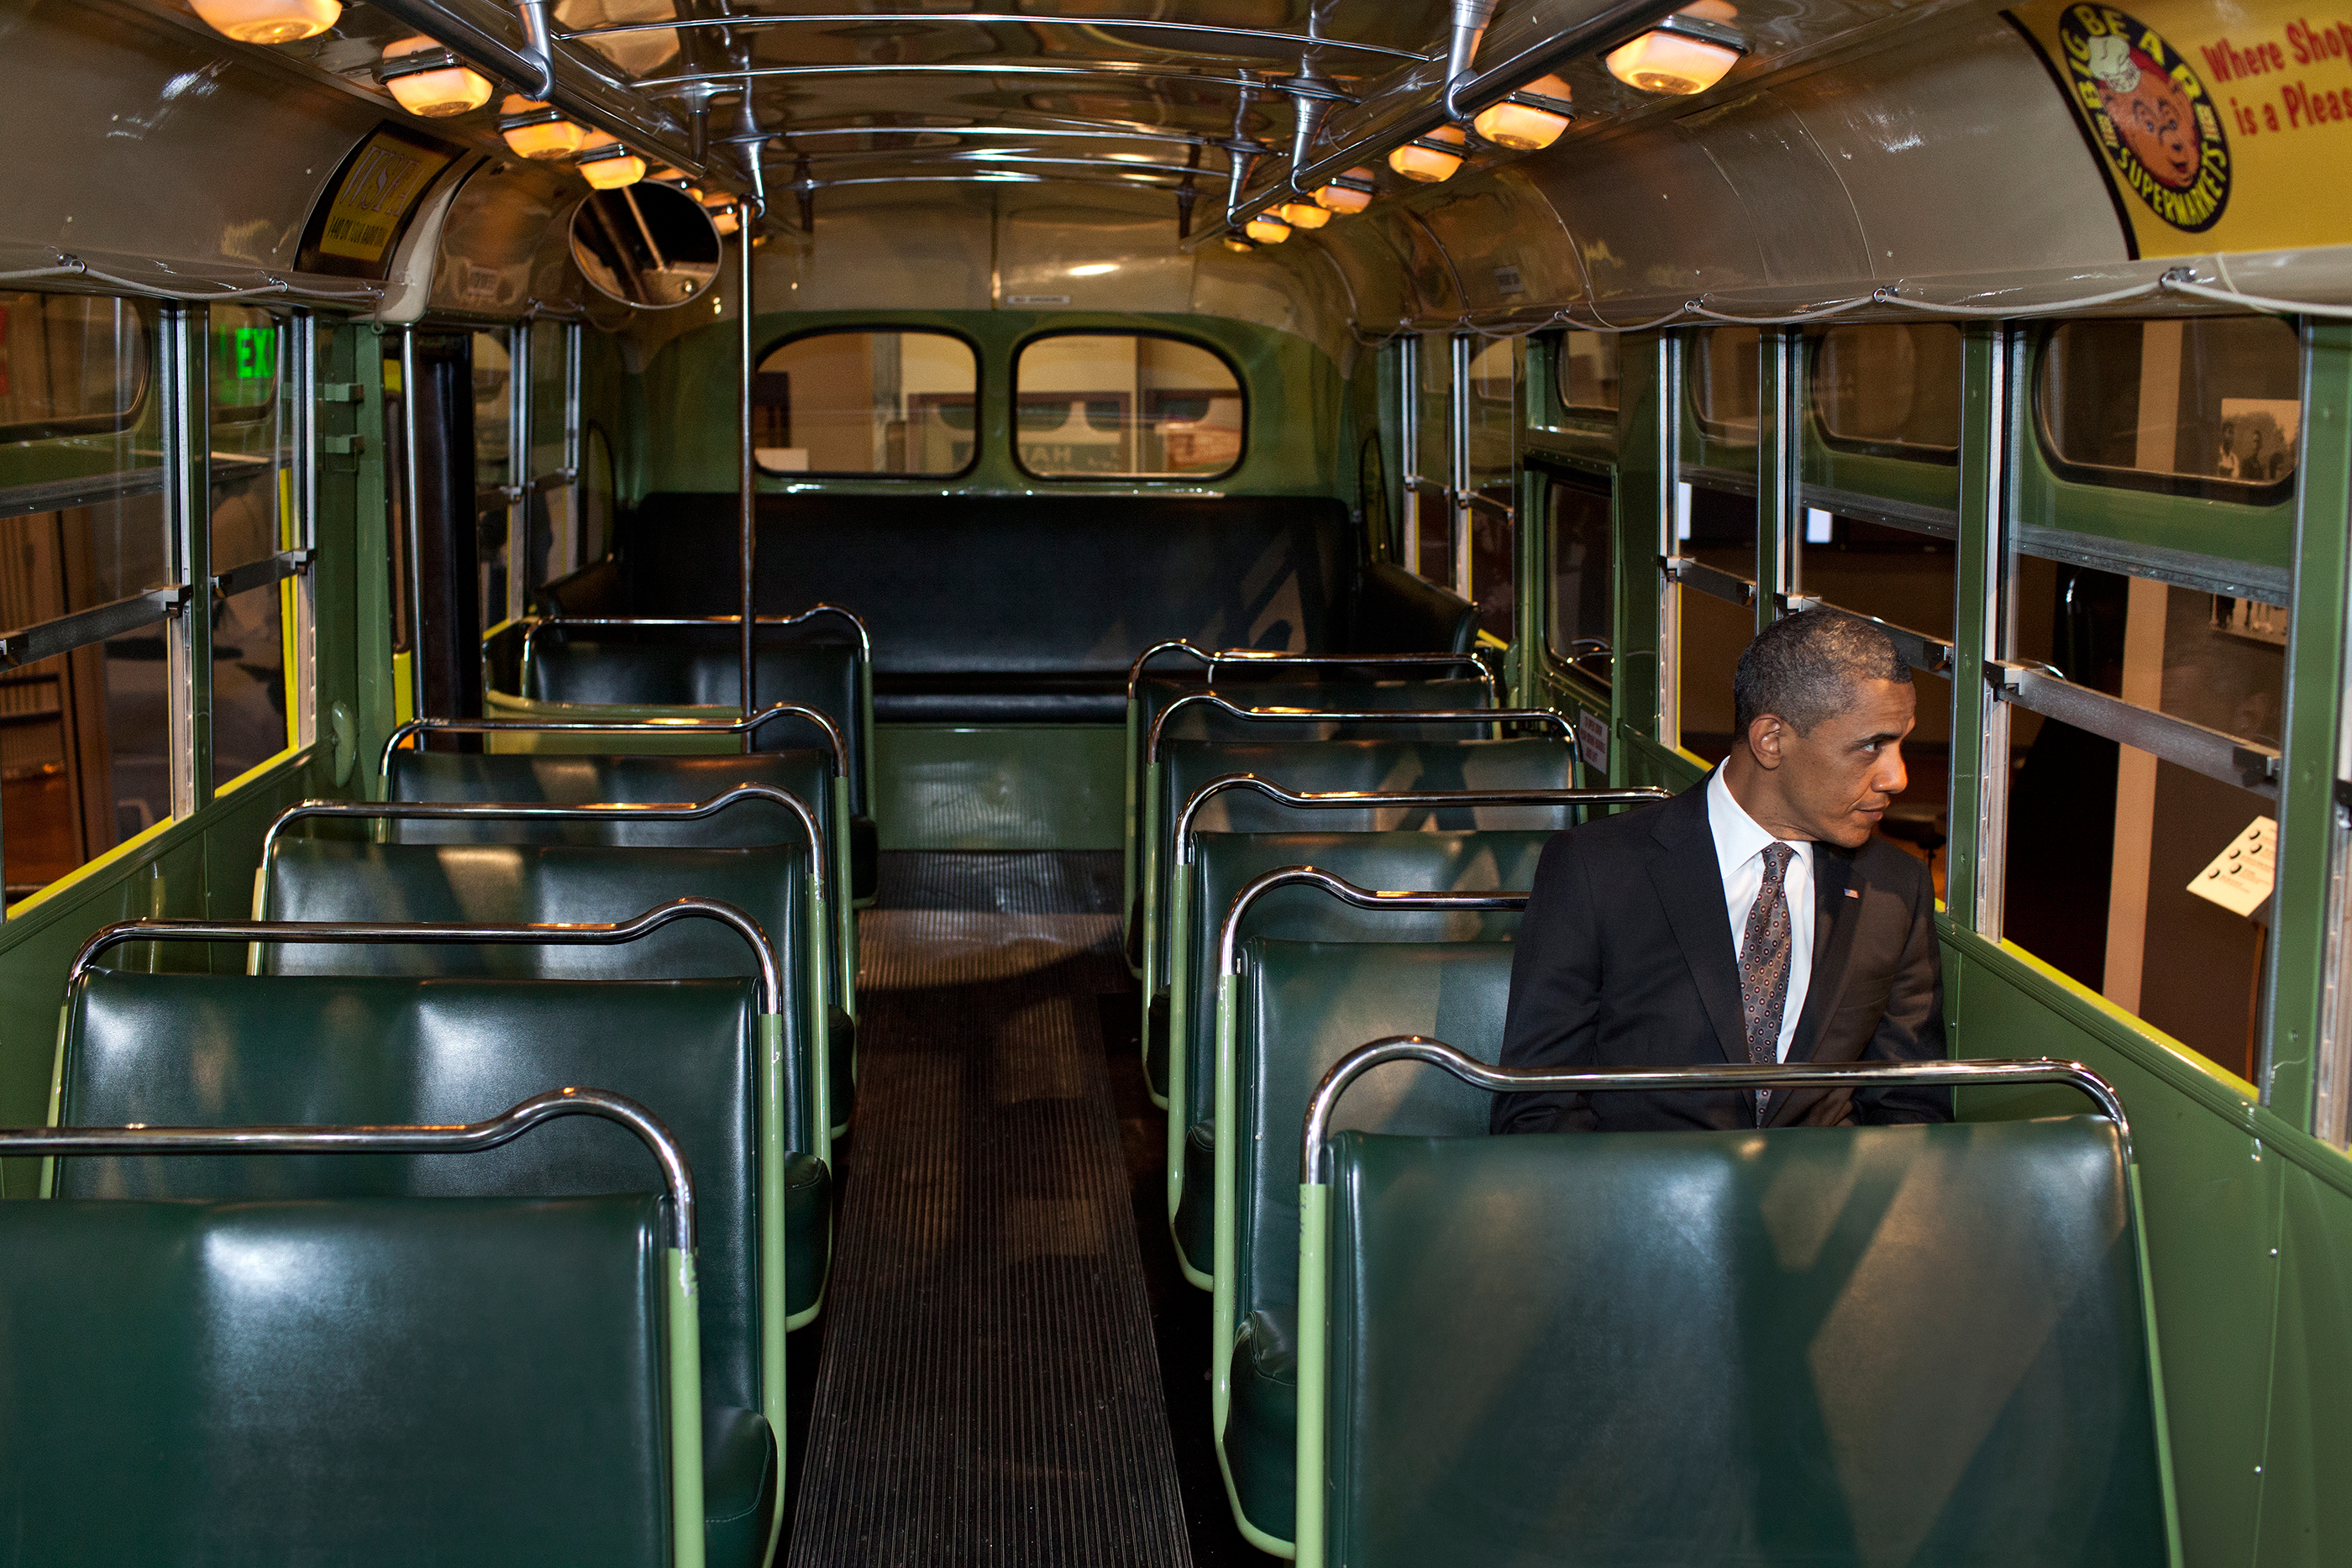 Michigan, April 18, 2012. Sitting on the famed Rosa Parks bus at the Henry Ford Museum in Dearborn. (Official White House Photo by Pete Souza)